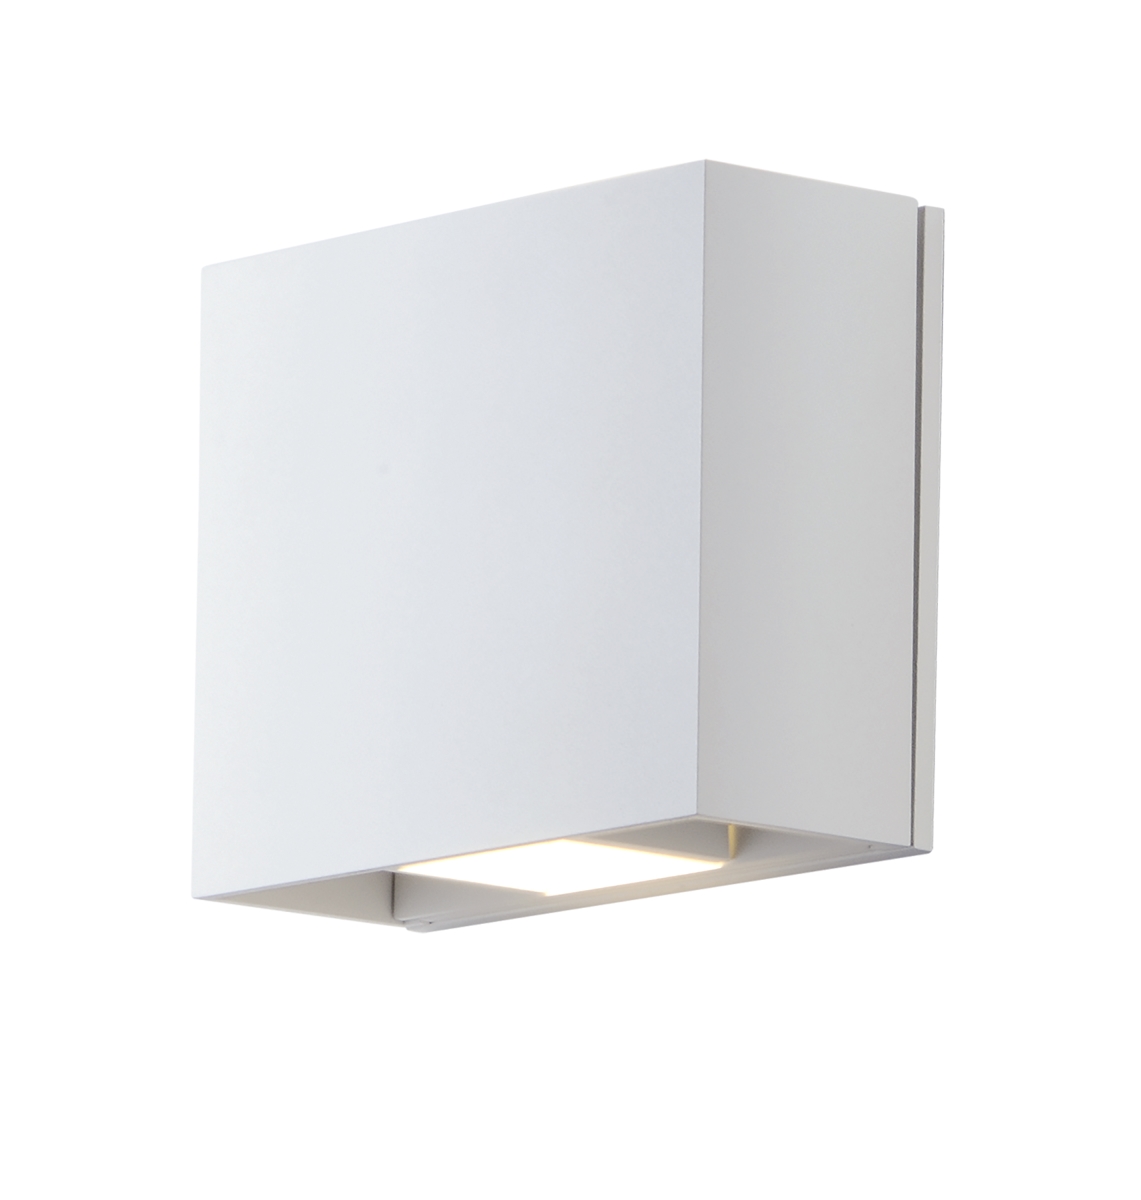 E41328-wt 6 In. Alumilux Led Outdoor Wall Sconce, White